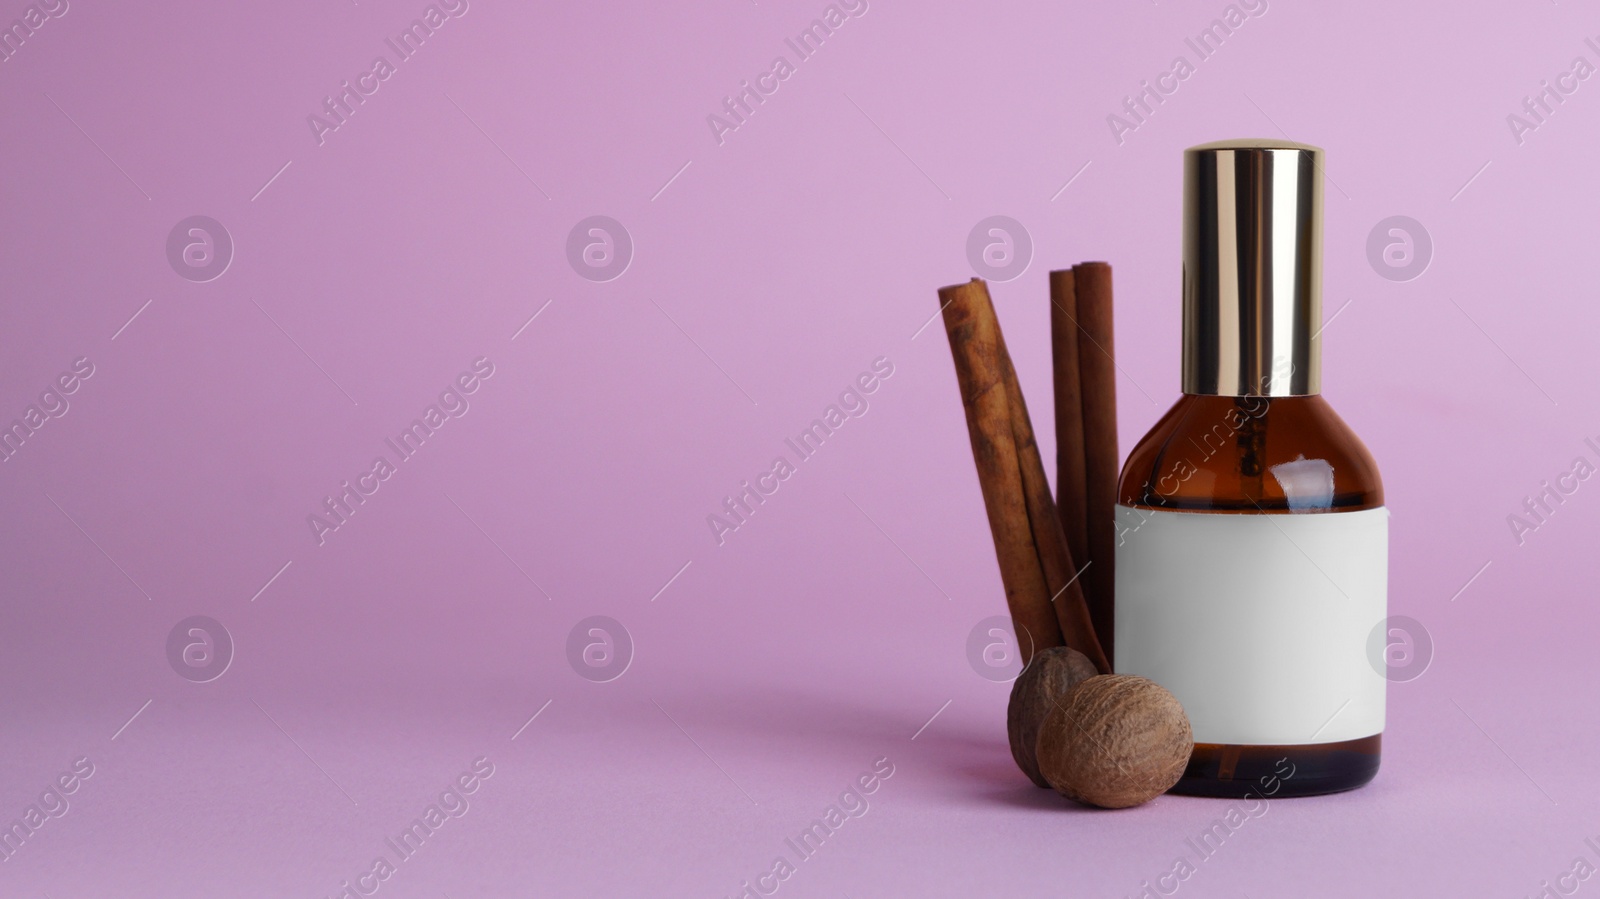 Photo of Bottle of luxurious perfume and spices on light purple background. Space for text